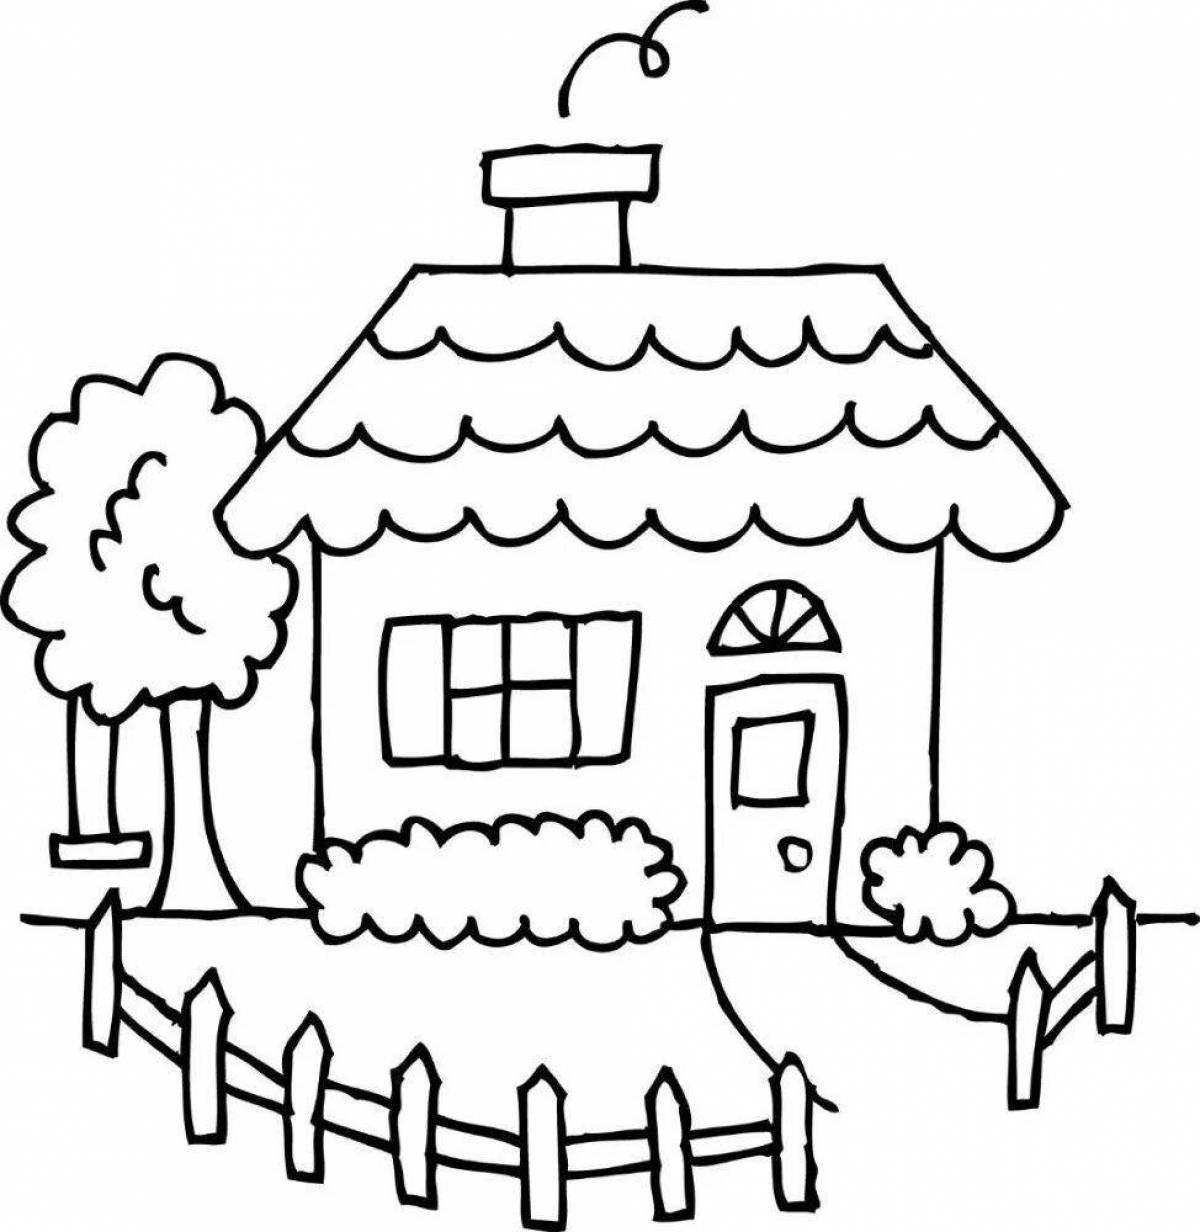 Colored village house coloring pages for kids